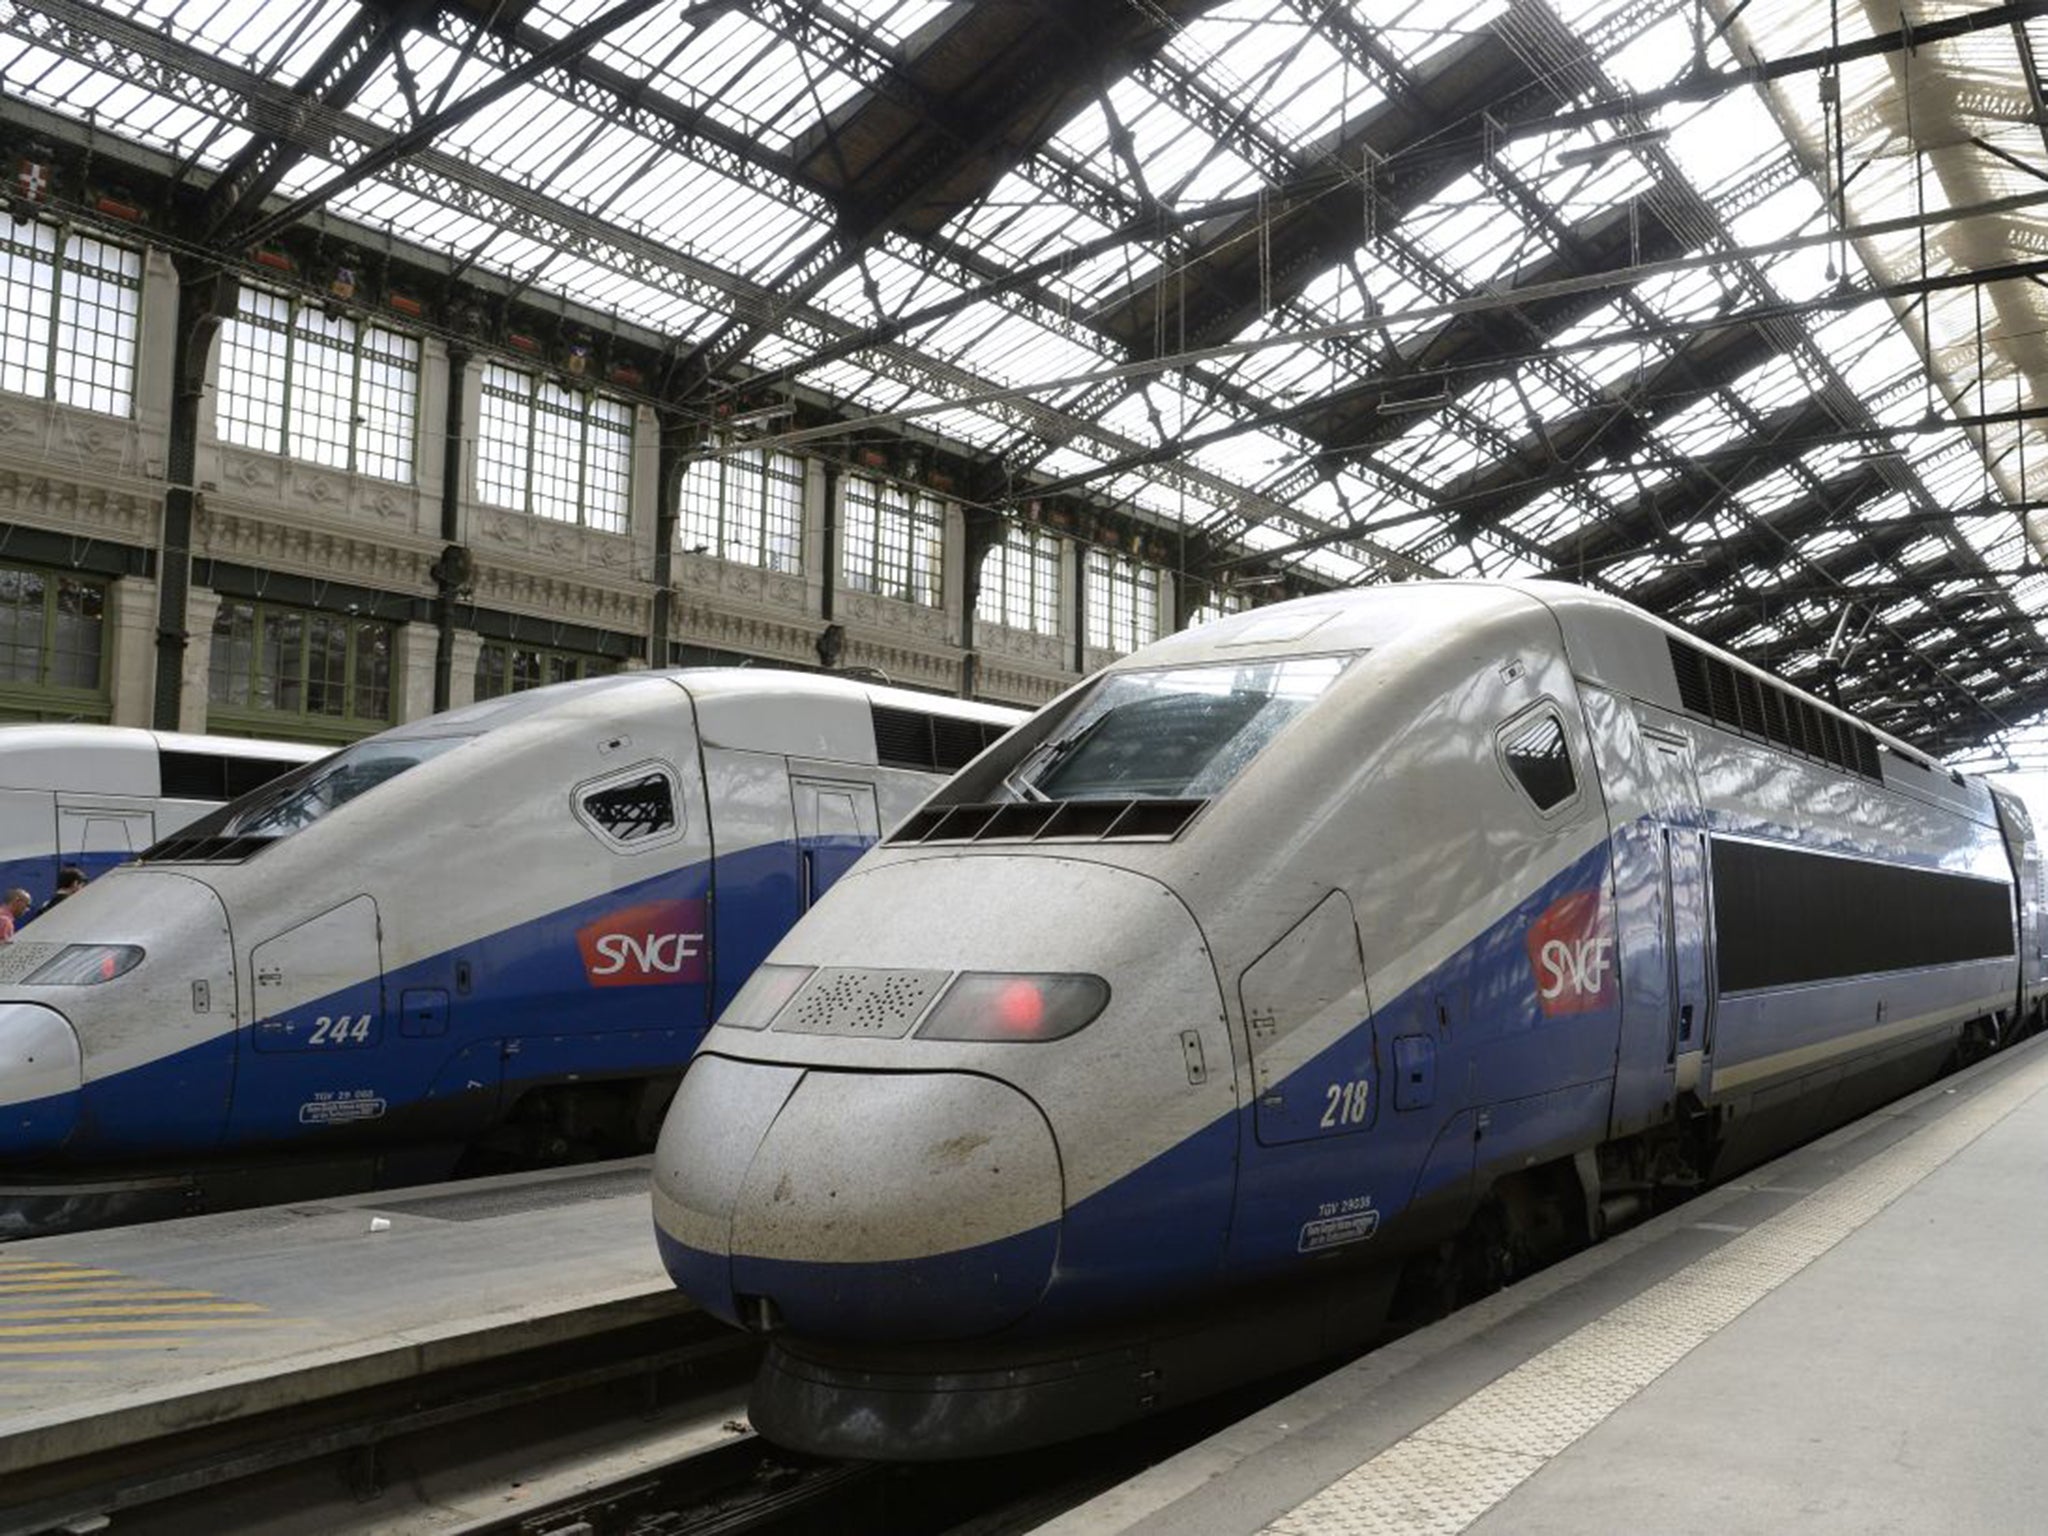 The TGV already faces an uphill battle; passenger numbers are falling and yet the price of tickets is not